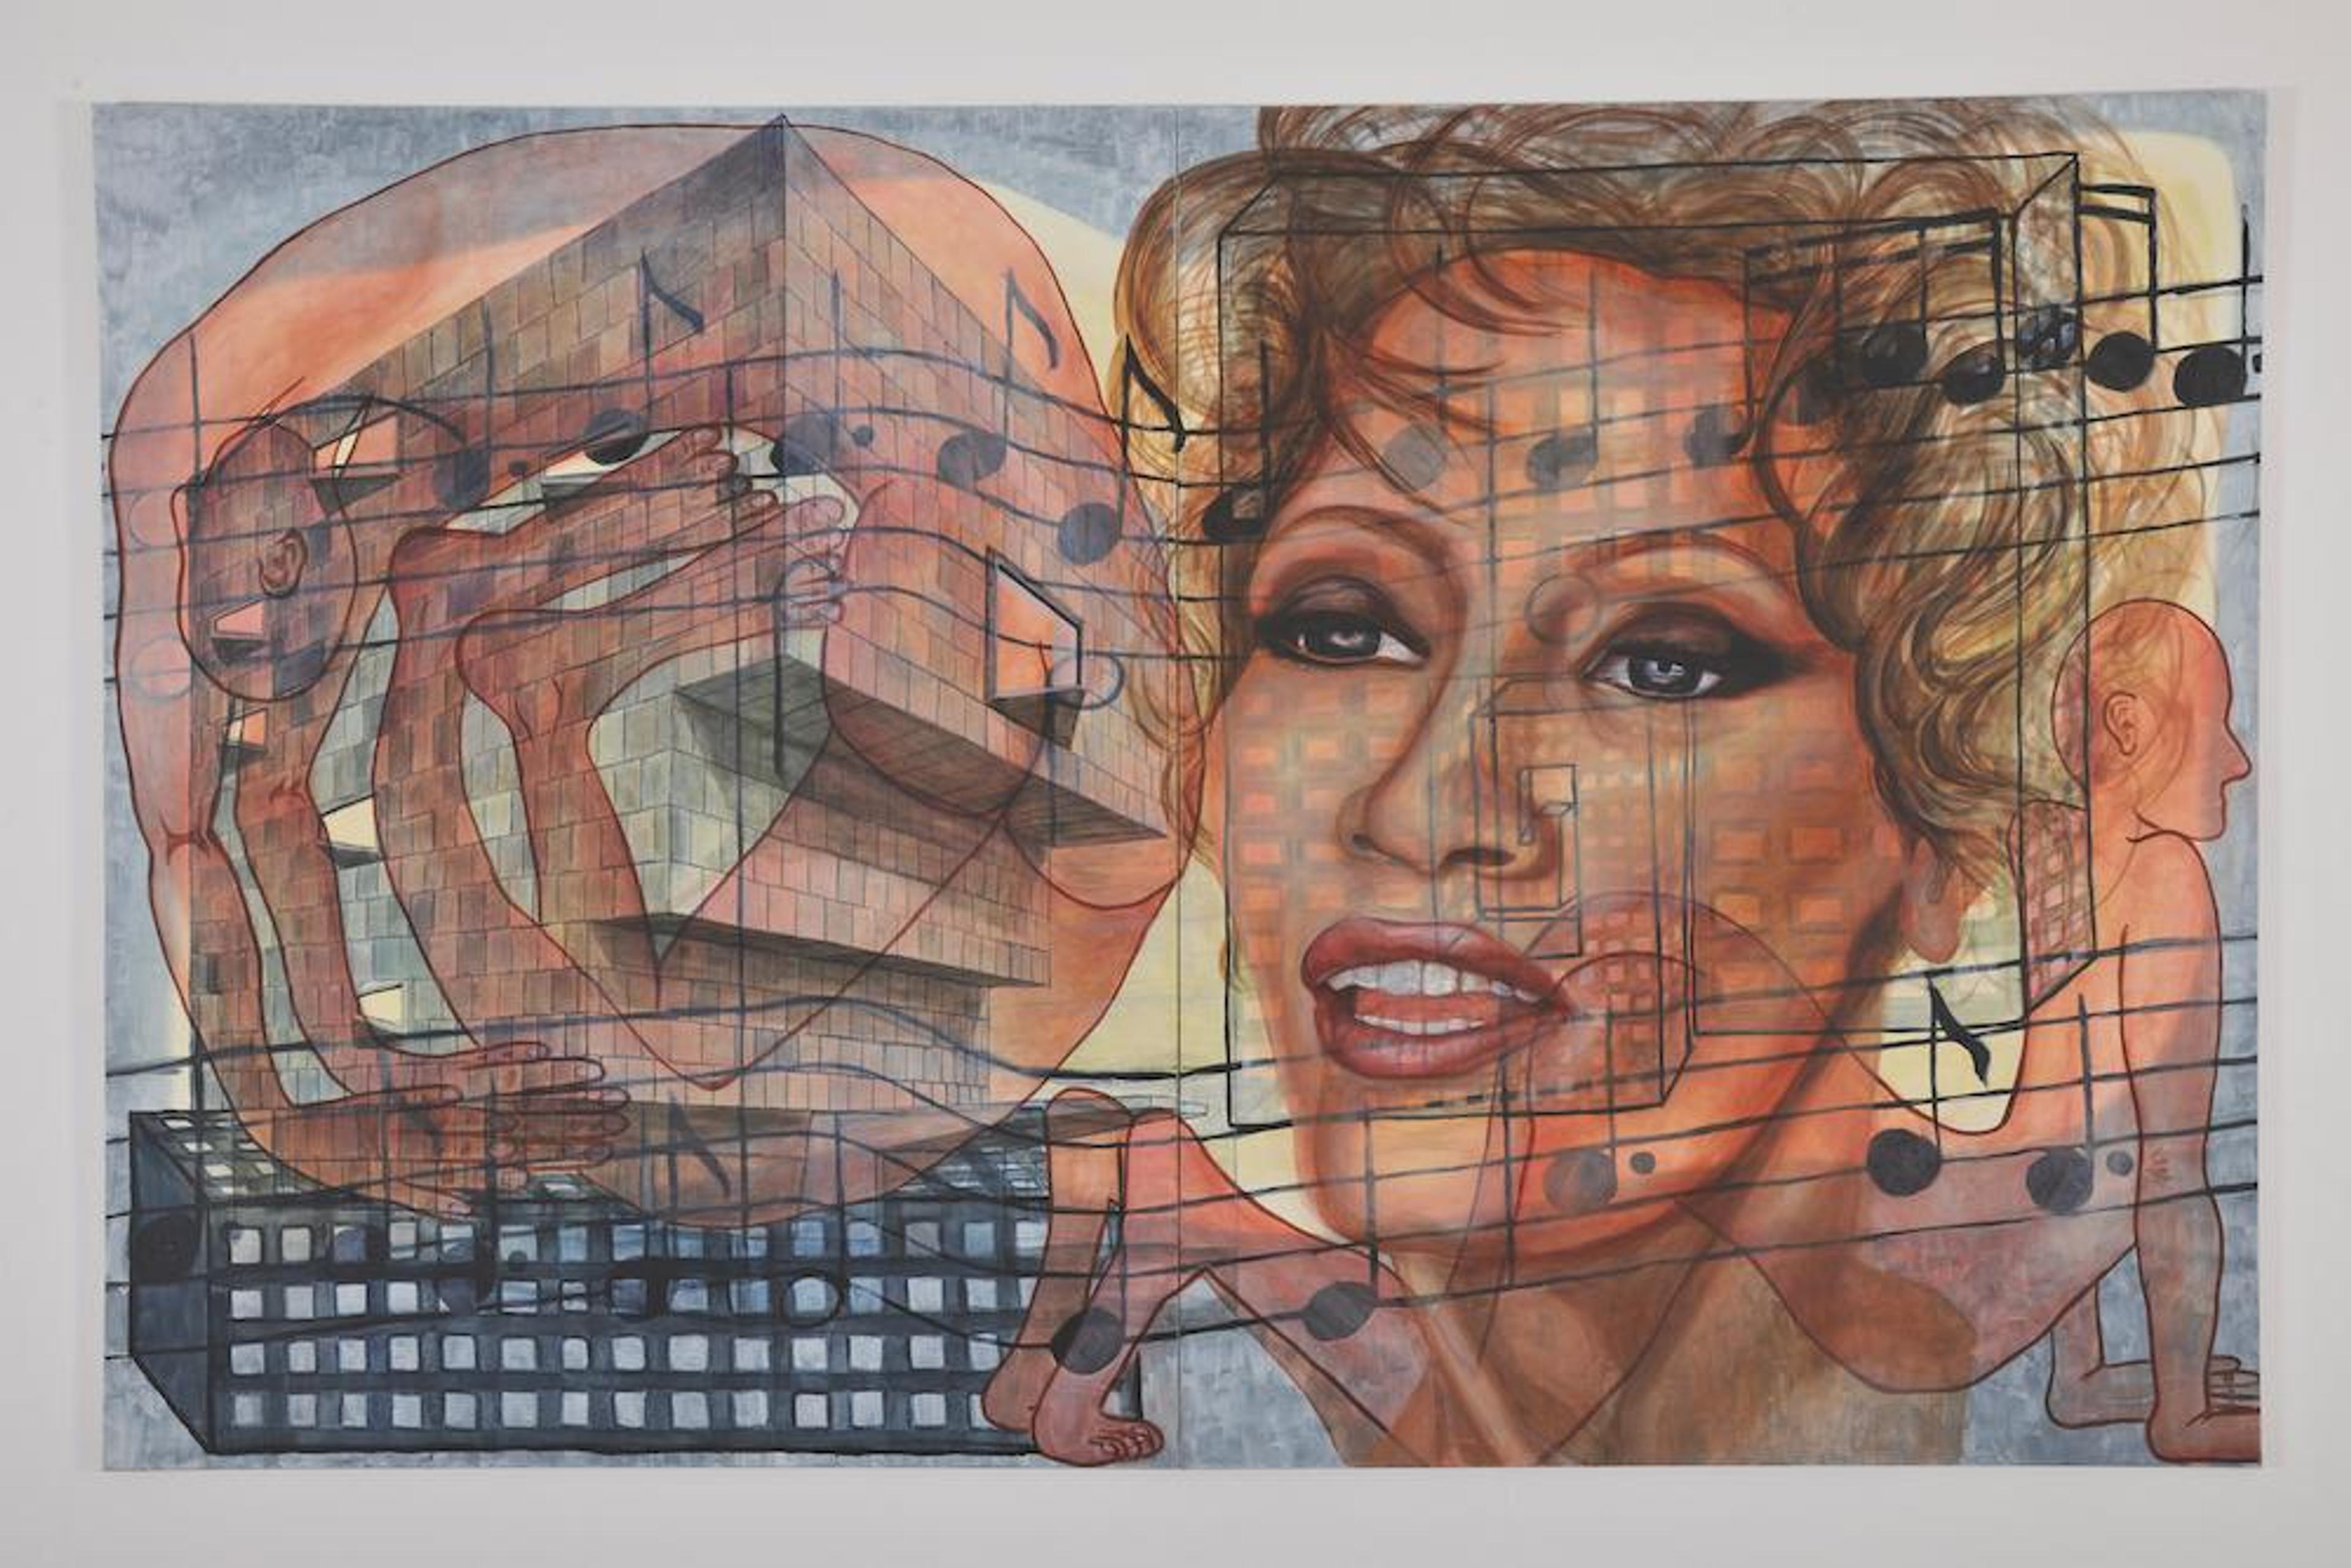 Jana Euler,  Whitney , 2013 Oil on canvas, 190 x 300 cm Courtesy the artist and dépendance, Brussels